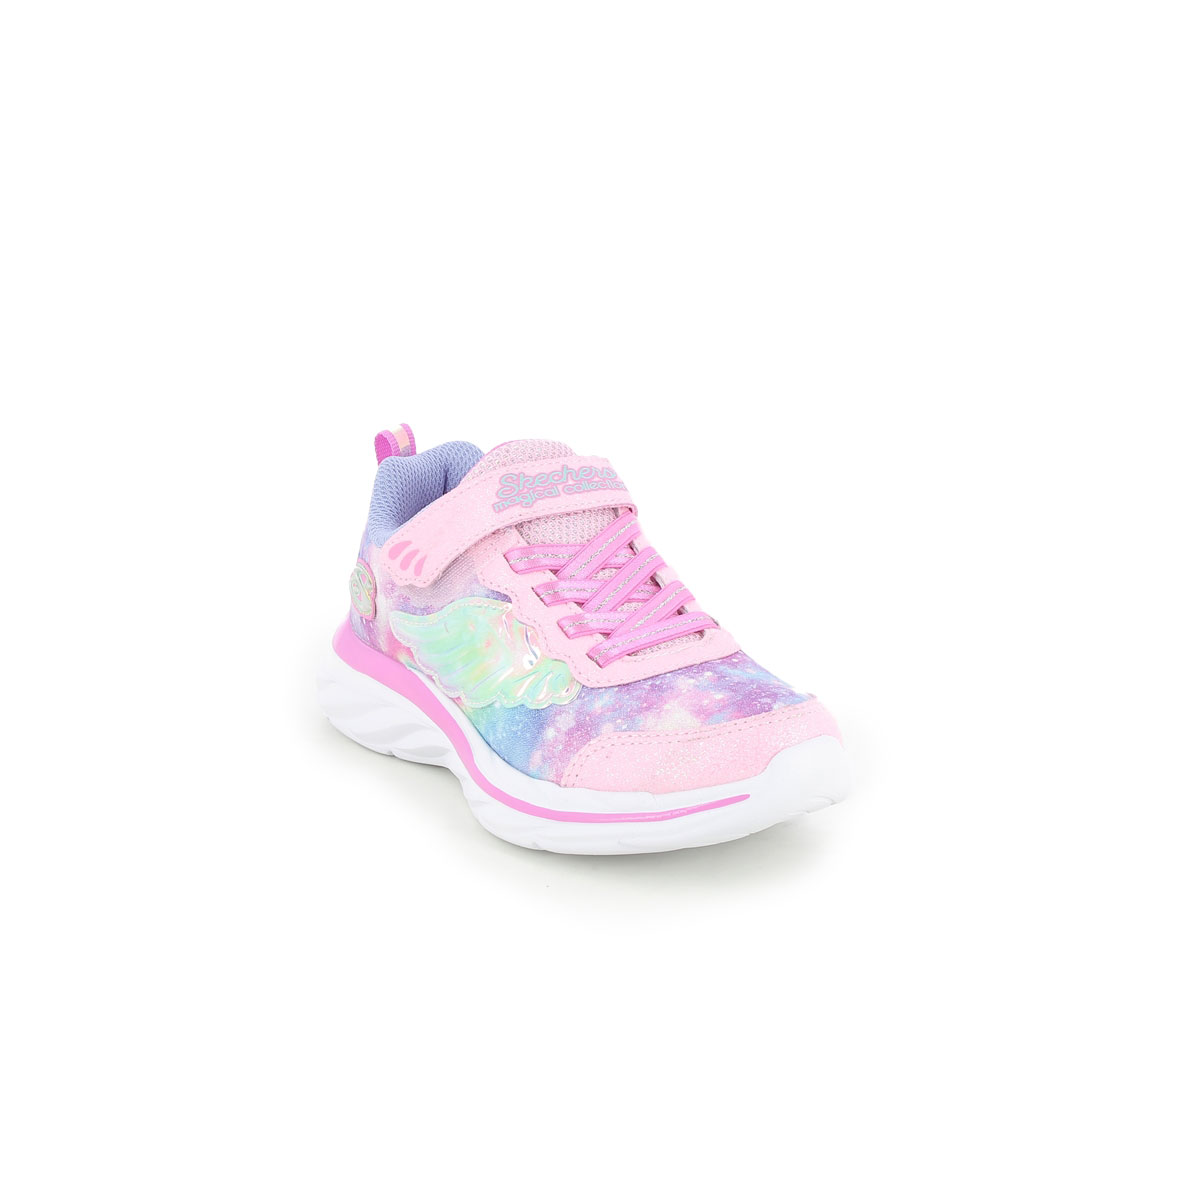 Skechers Flying Beauty Pink Lavender Kids Girls Trainers 302208L In Size 32 In Plain Pink Lavender For kids